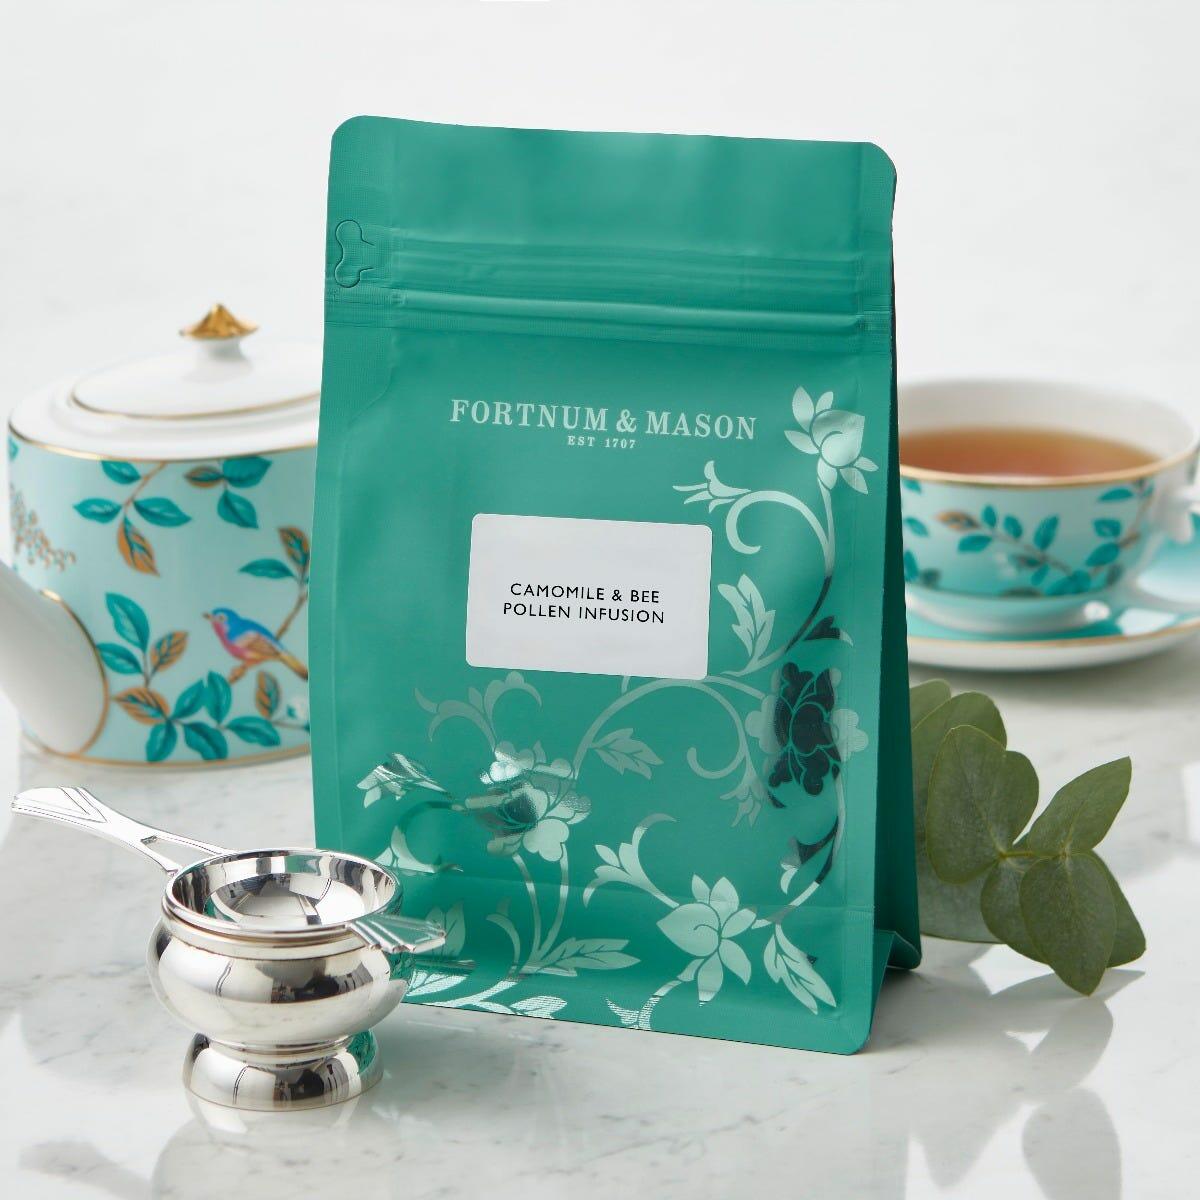 Camomile & Bee Pollen Infusion Pouch, 15 Silky Tea Bags, 30g, Fortnum & Mason